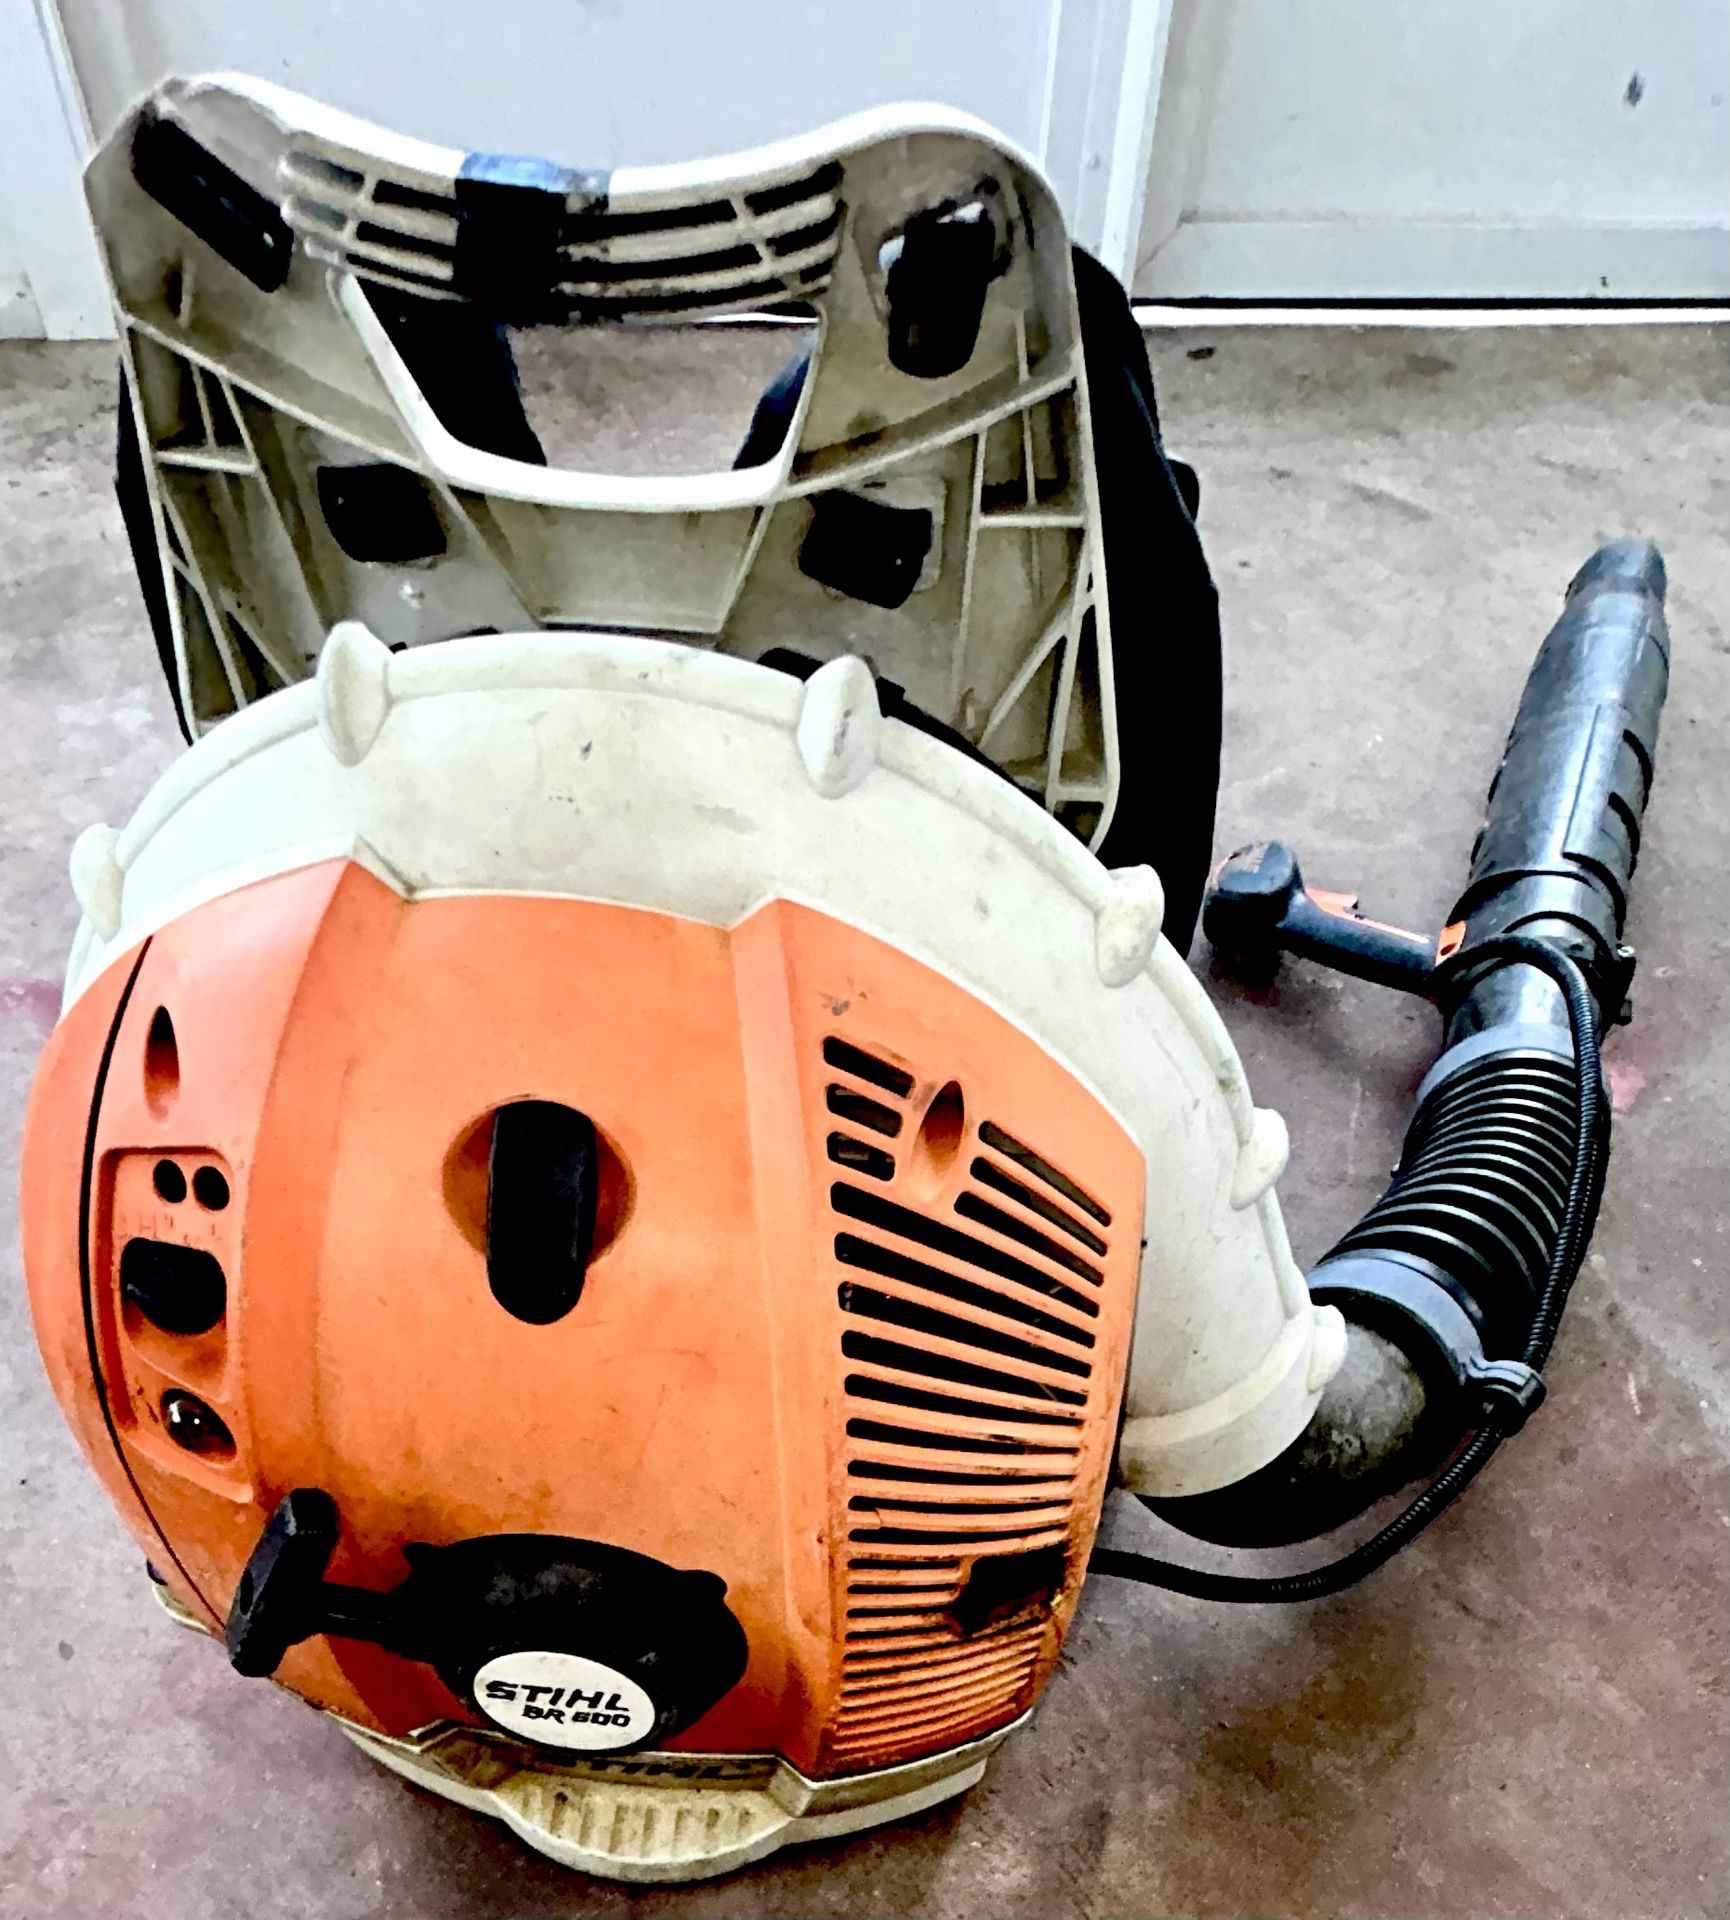 STIHL BR600 Commercial Backpack Blower  STARTS 1 PULL  RUNS GREAT  VERY POWERFUL  NO ISSUES